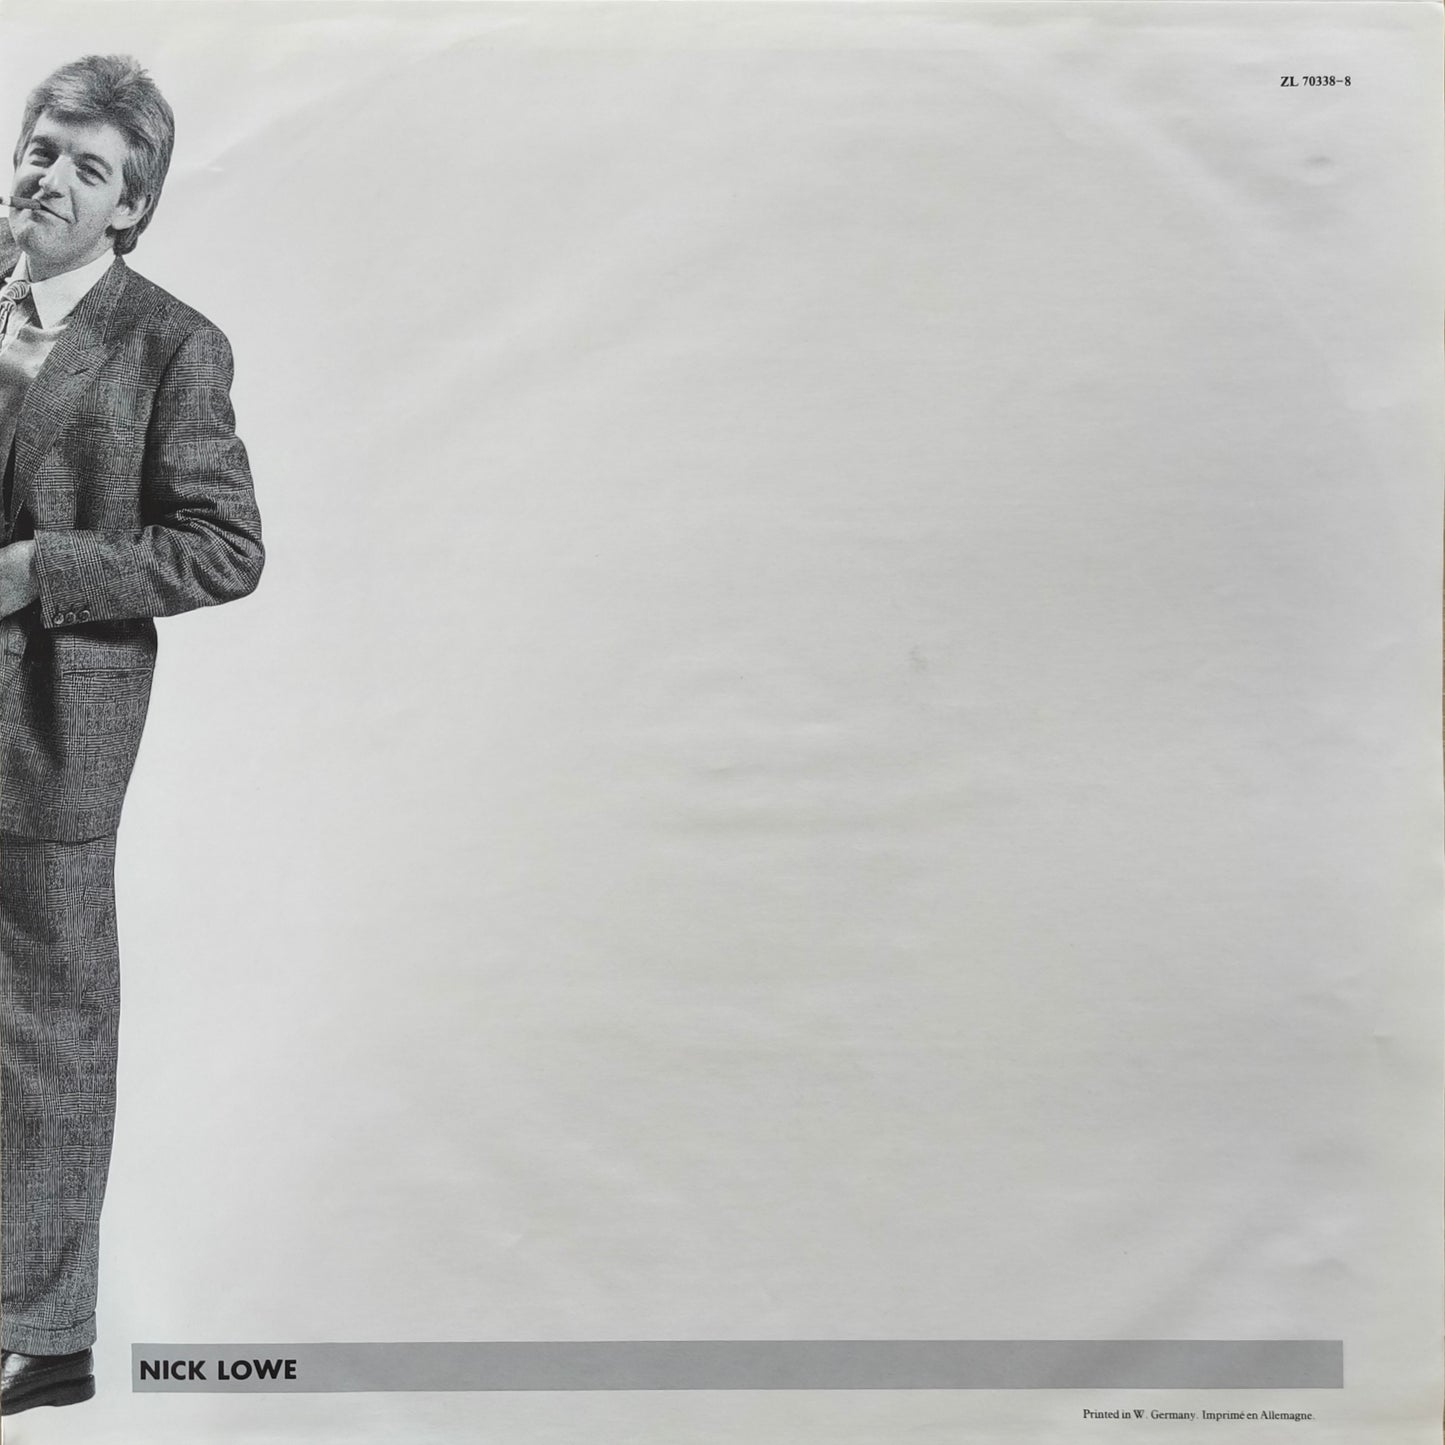 NICK LOWE AND HIS COWBOY OUTFIT - Nick Lowe And His Cowboy Outfit